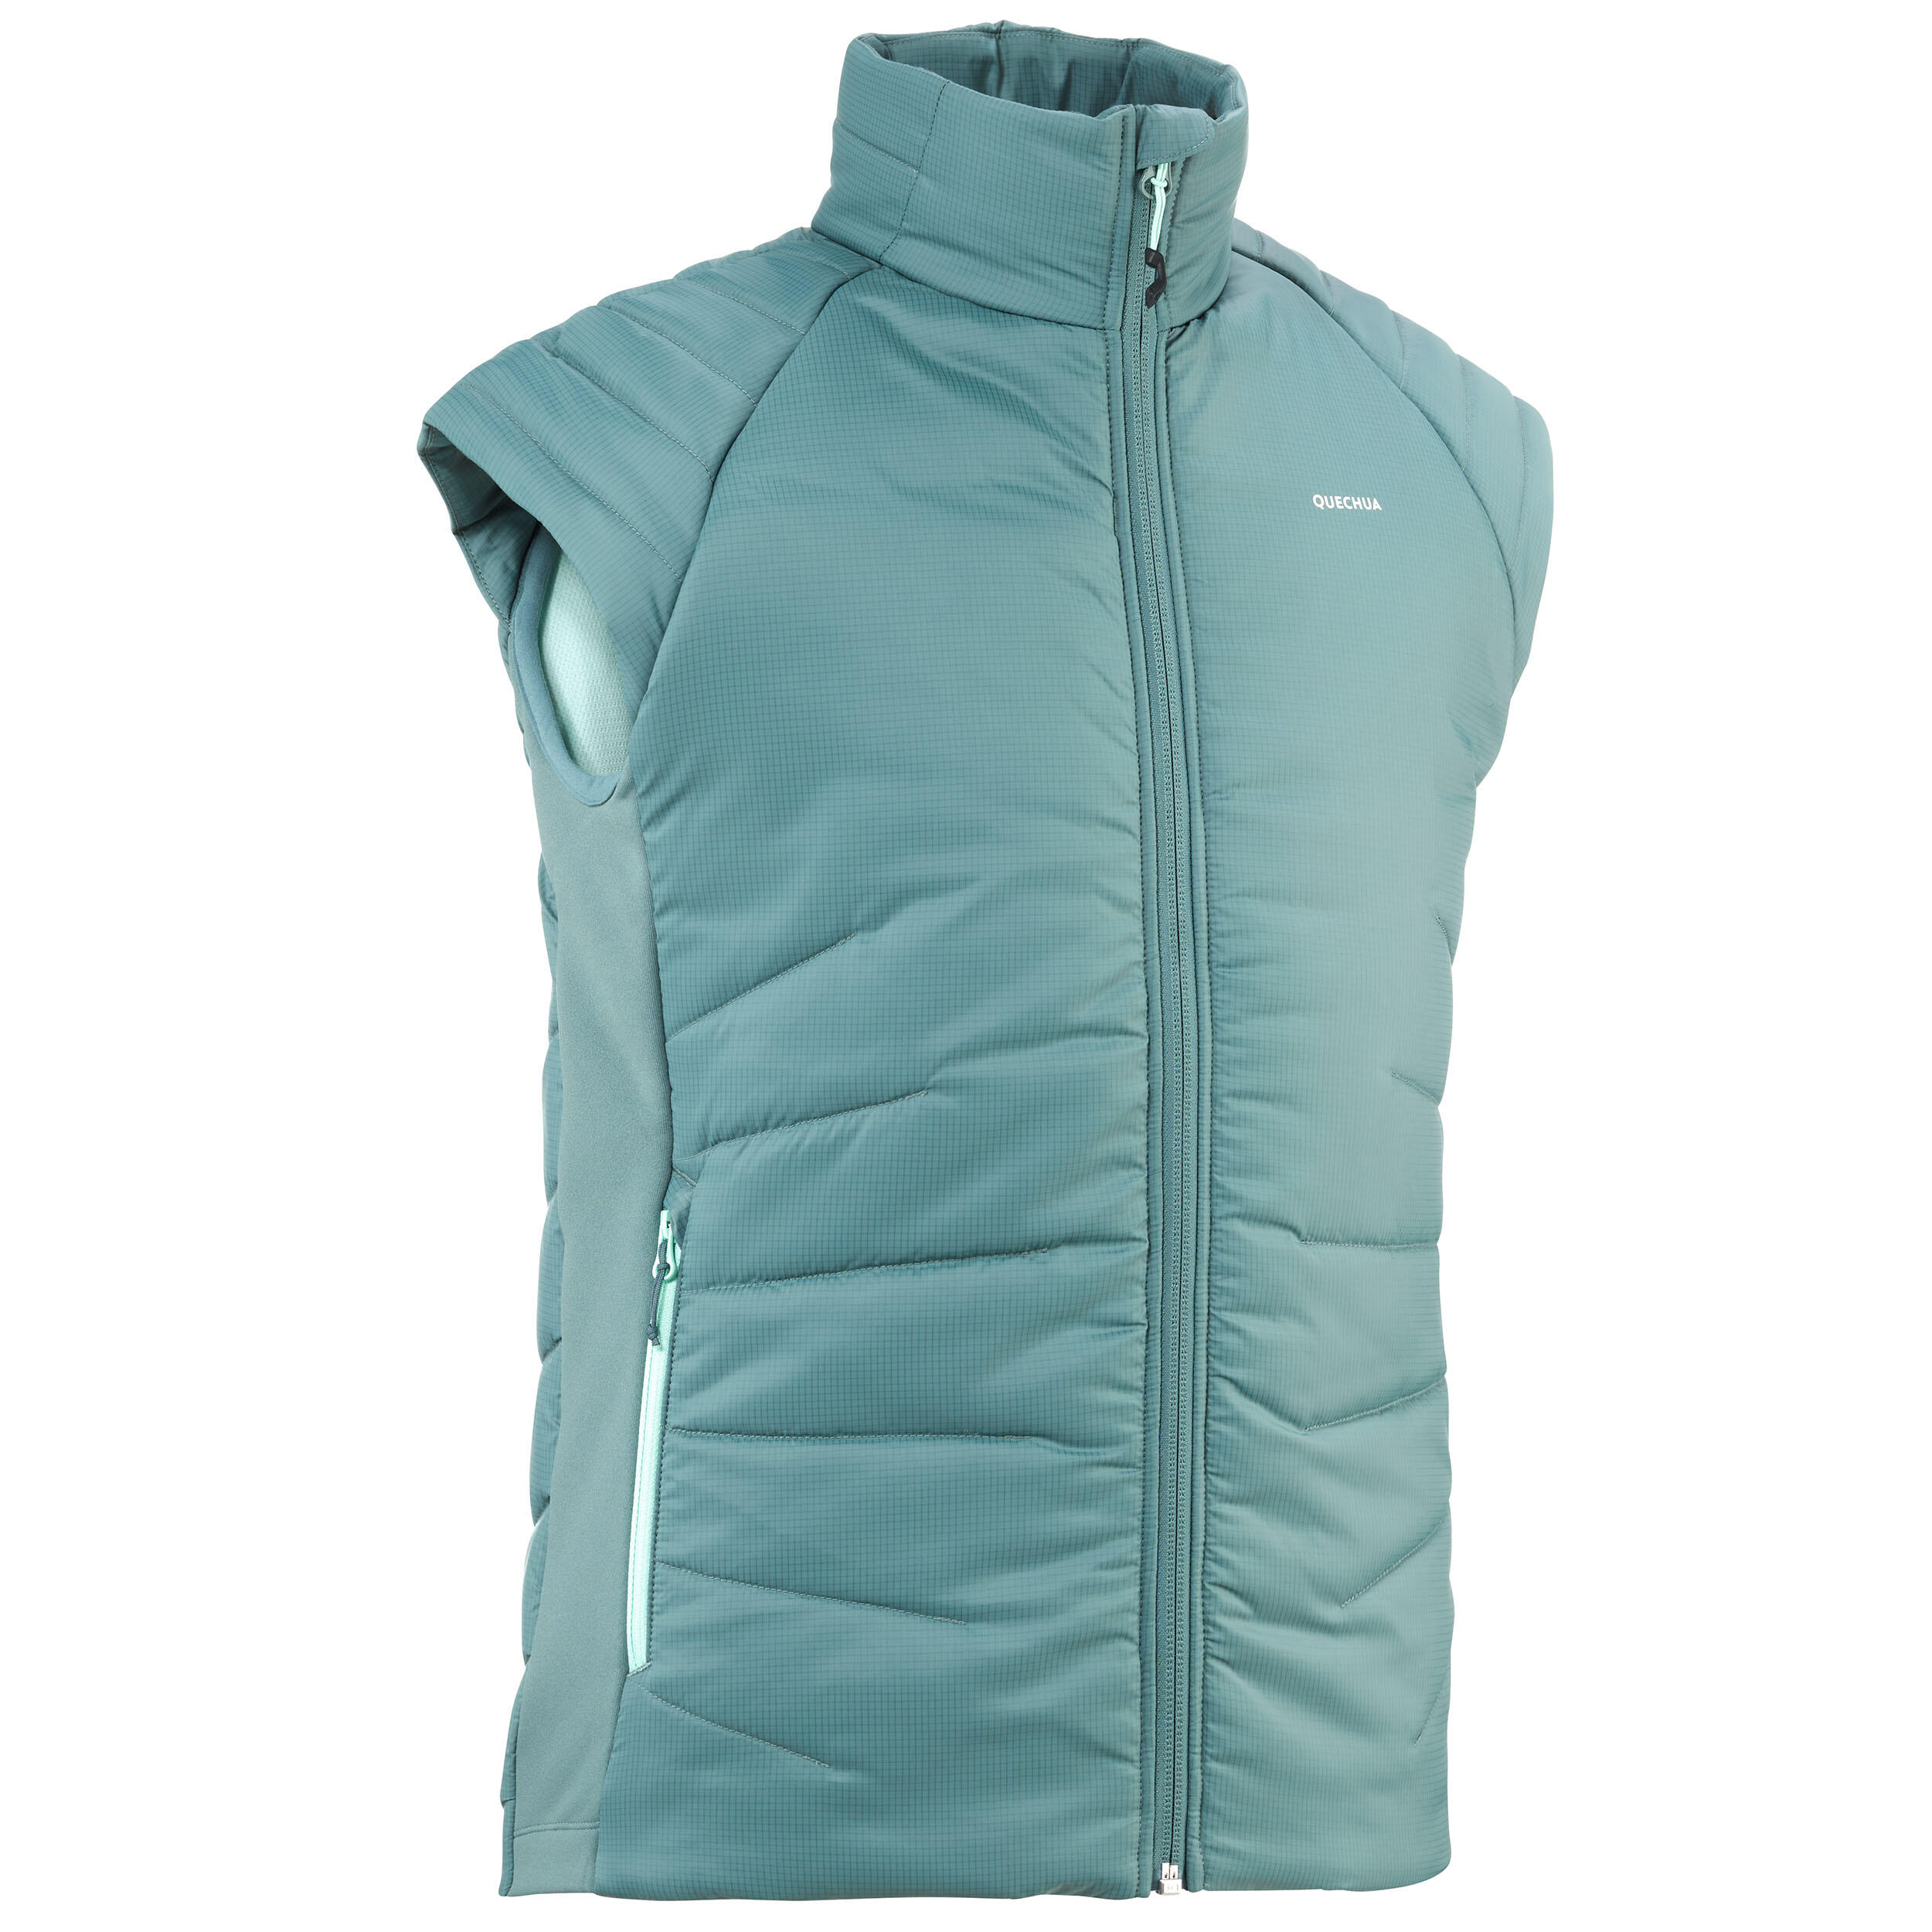 Gilets and Body Warmers